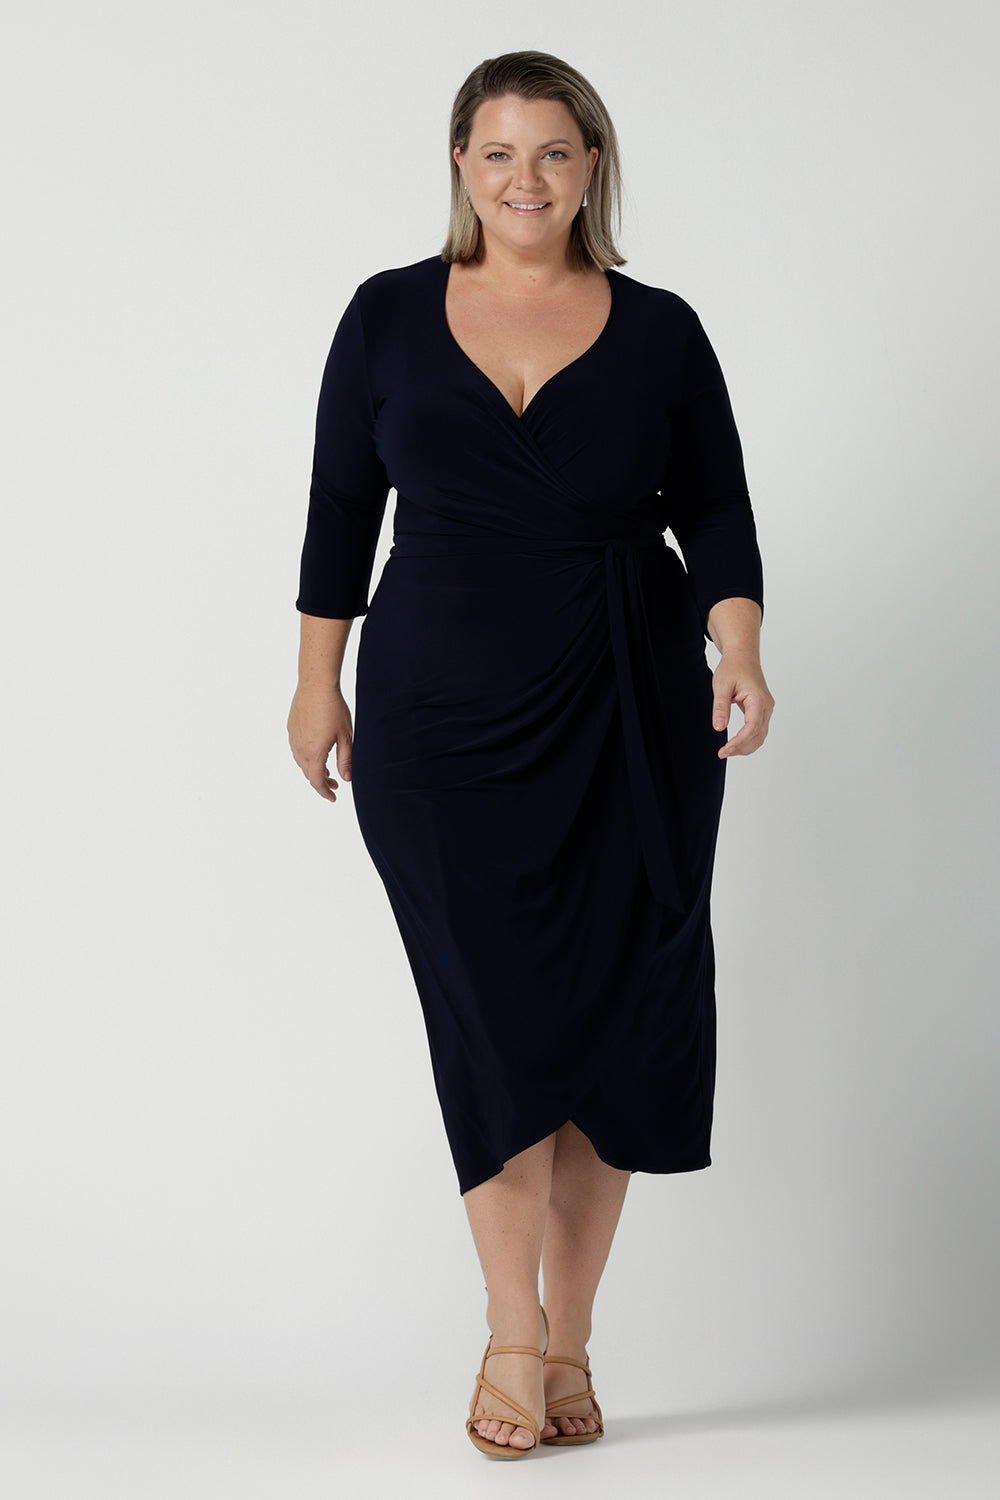 Size 18 curvy woman wears the Robin dress in Navy. Midi length with 3/4 sleeves. V-neckline with a functioning wrap. A great work to weekend piece. Made in Australia for women size 8 - 24.